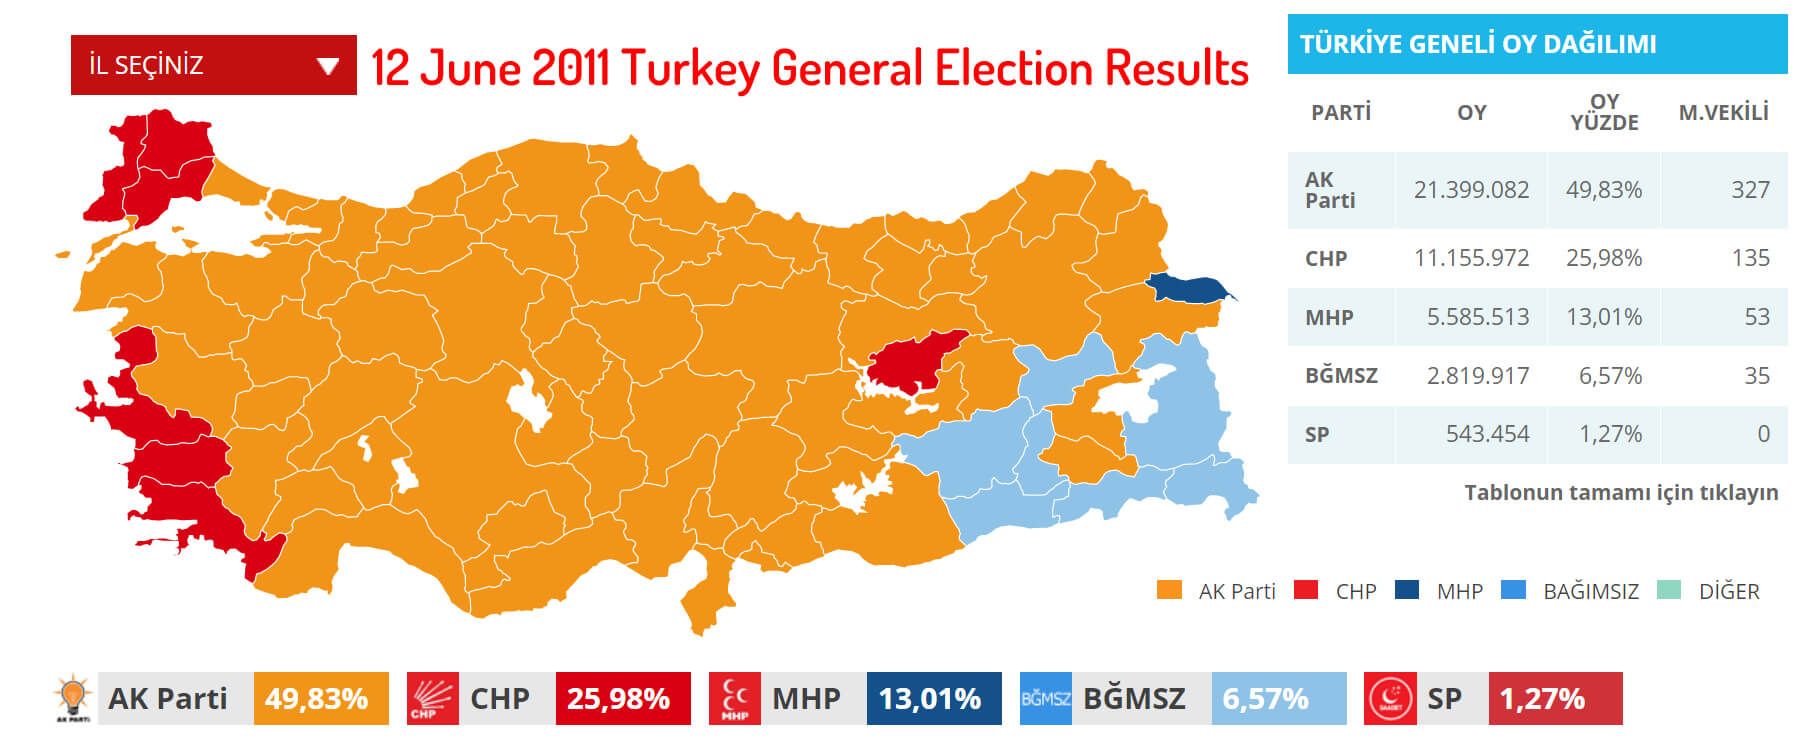 12 June 2011 Turkey General Election Results